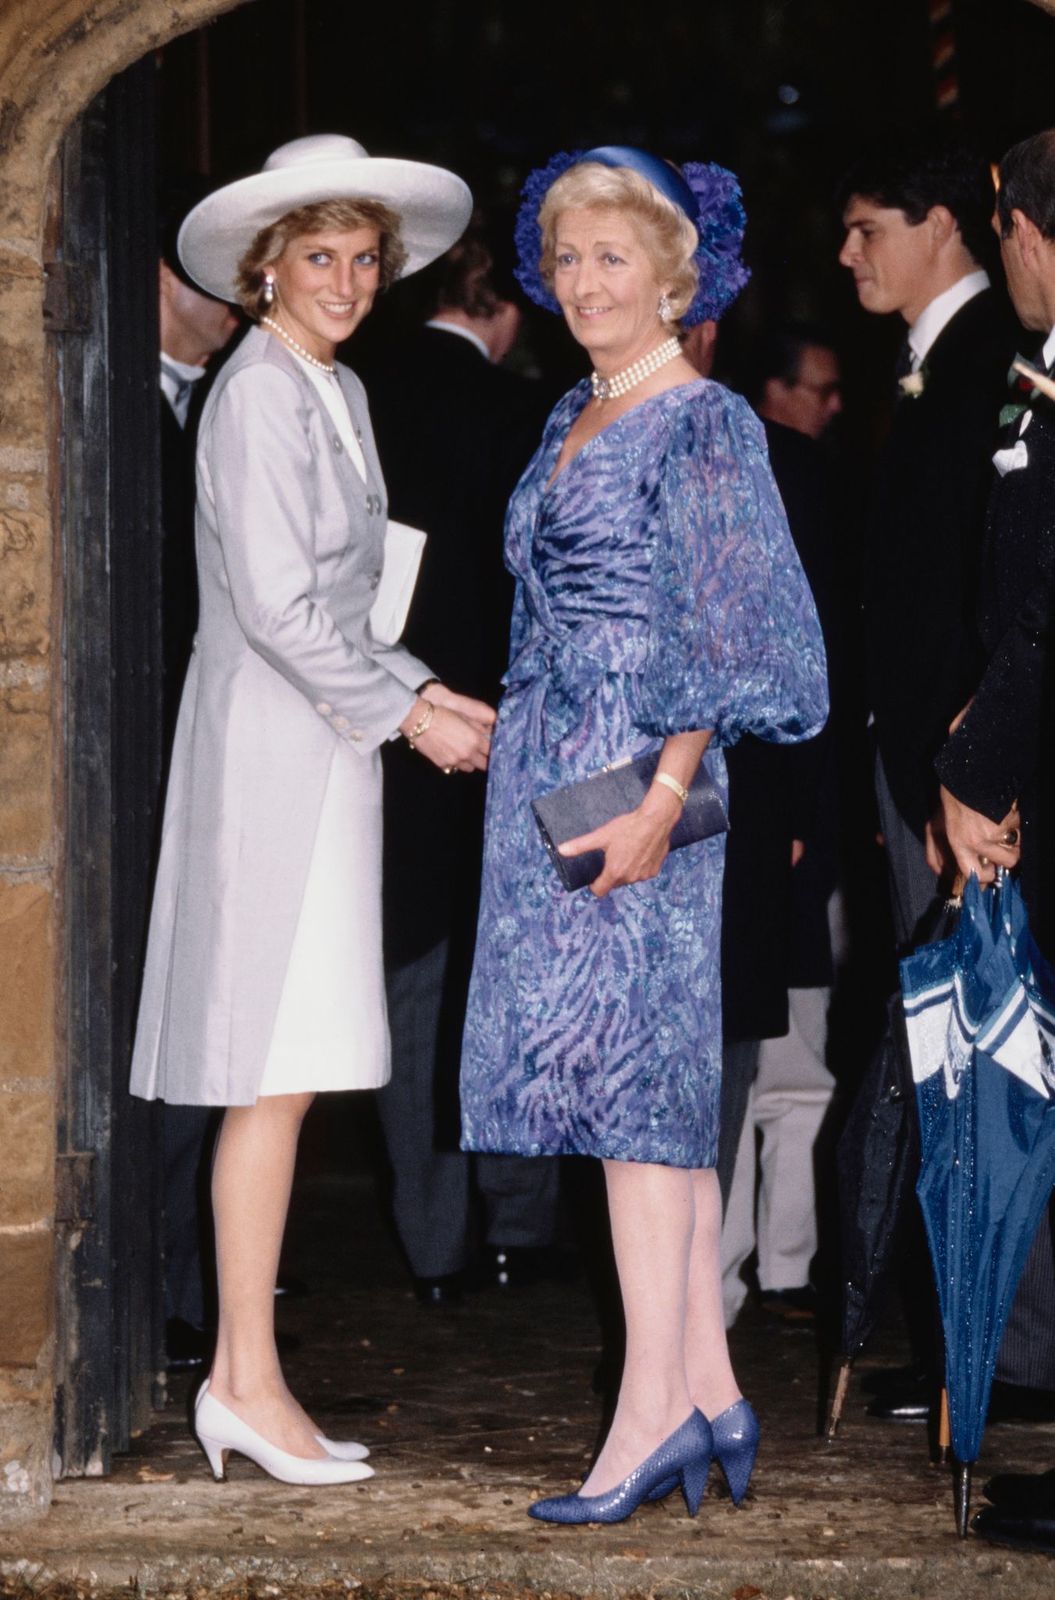 Diana, Princess of Wales (1961 - 1997) with her mother Frances Shand Kydd at the wedding of Diana's brother Viscount Althorp to Victoria Lockwood at St Mary's Church in Great Brington, Northamptonshire, 16th September 1989 | Getty Images